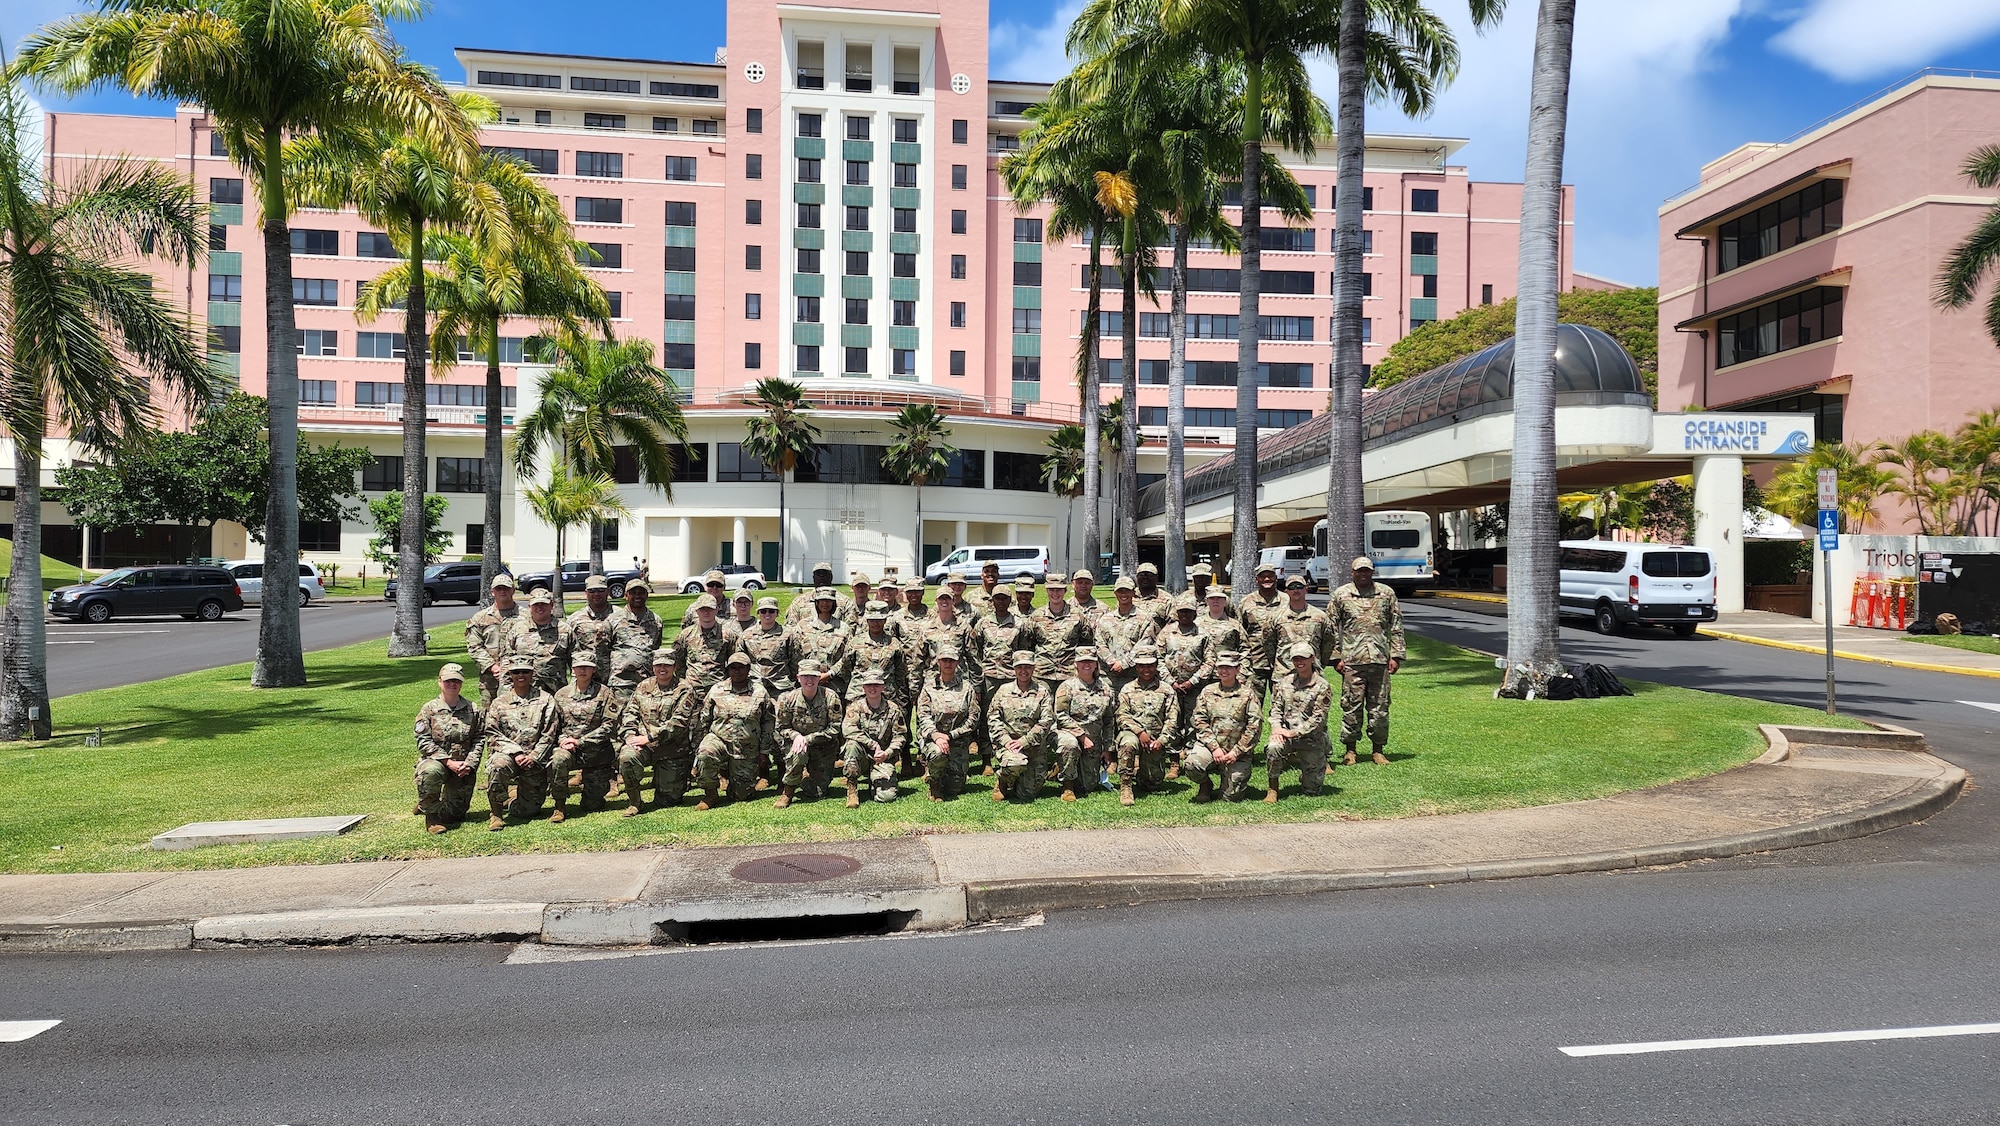 U.S. Air Force Airmen assigned to the 125th Medical Group, Florida Air National Guard, pose in front of Tripler Army Medical Center, Army Post Schofield Barracks, July 13, 2022. The multidisciplinary team of physicians, nurses, nurse practitioners, dentists and bioenvironmental technicians satisfied much-needed inpatient clinical hours and medical training in a hospital environment. This year, the 125th MDG was recognized as one of the top 17 Air National Guard medical units in the country. (Courtesy photo)